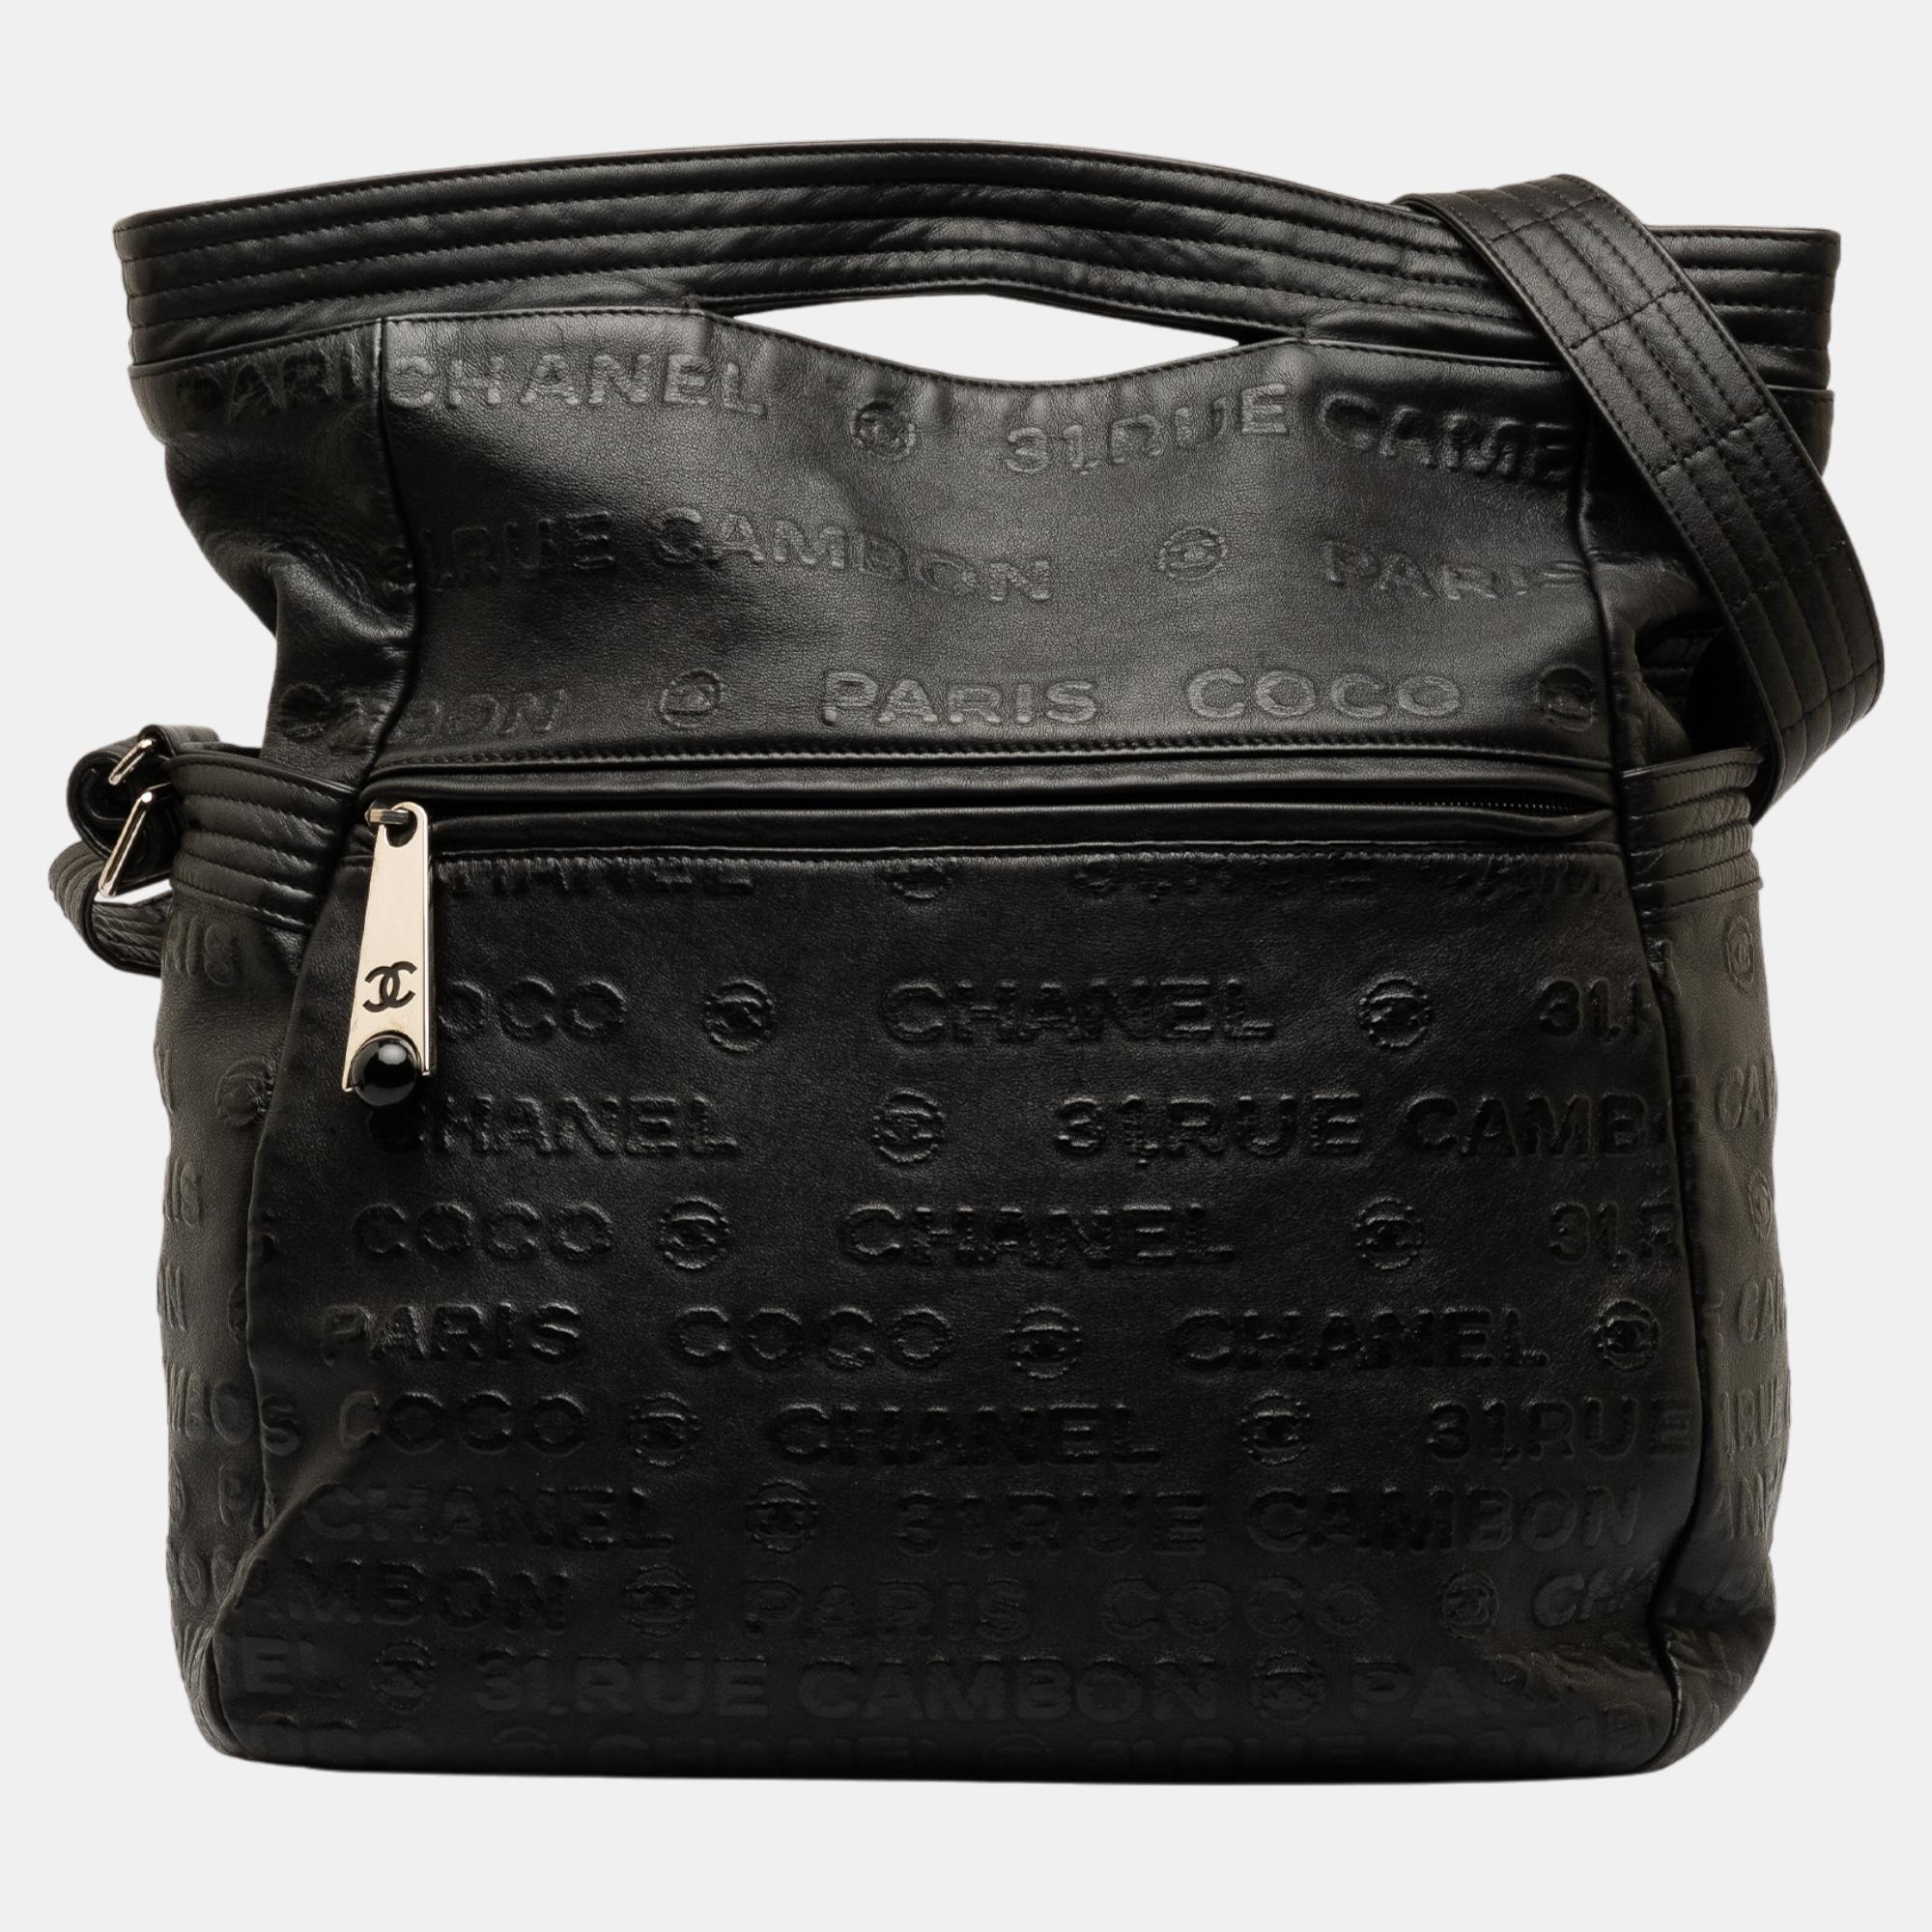 

Chanel Black 31 Rue Cambon Embossed Leather Satchel